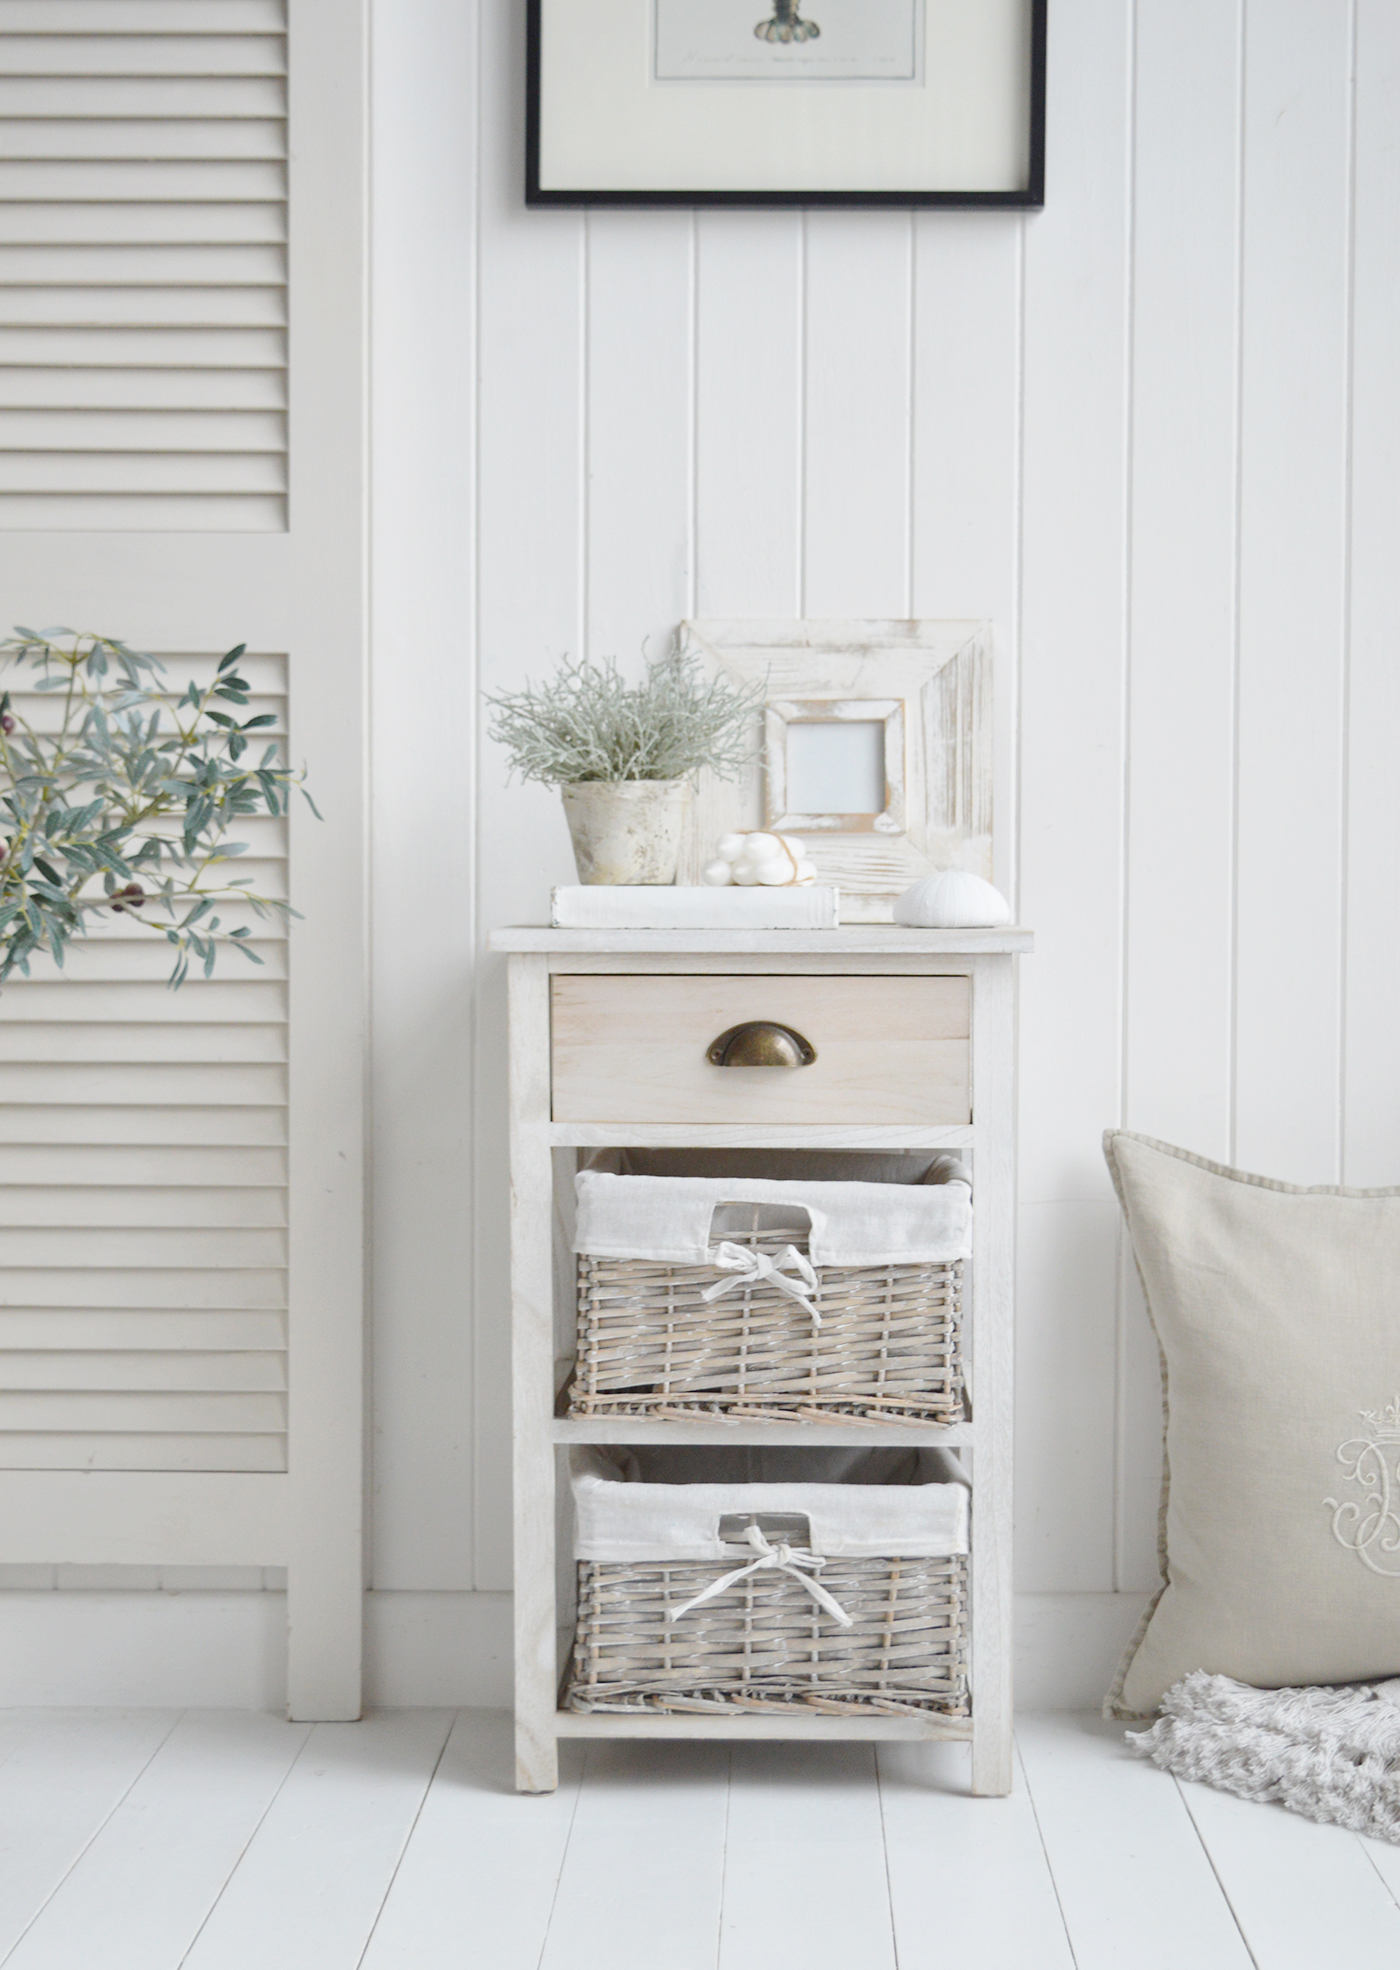 Dorset Cabinet with 3 Drawers in light grey washed wood - New England Coastal and Modern Country Furniture. Storage furniture with baskets. Ideal for the bedroom